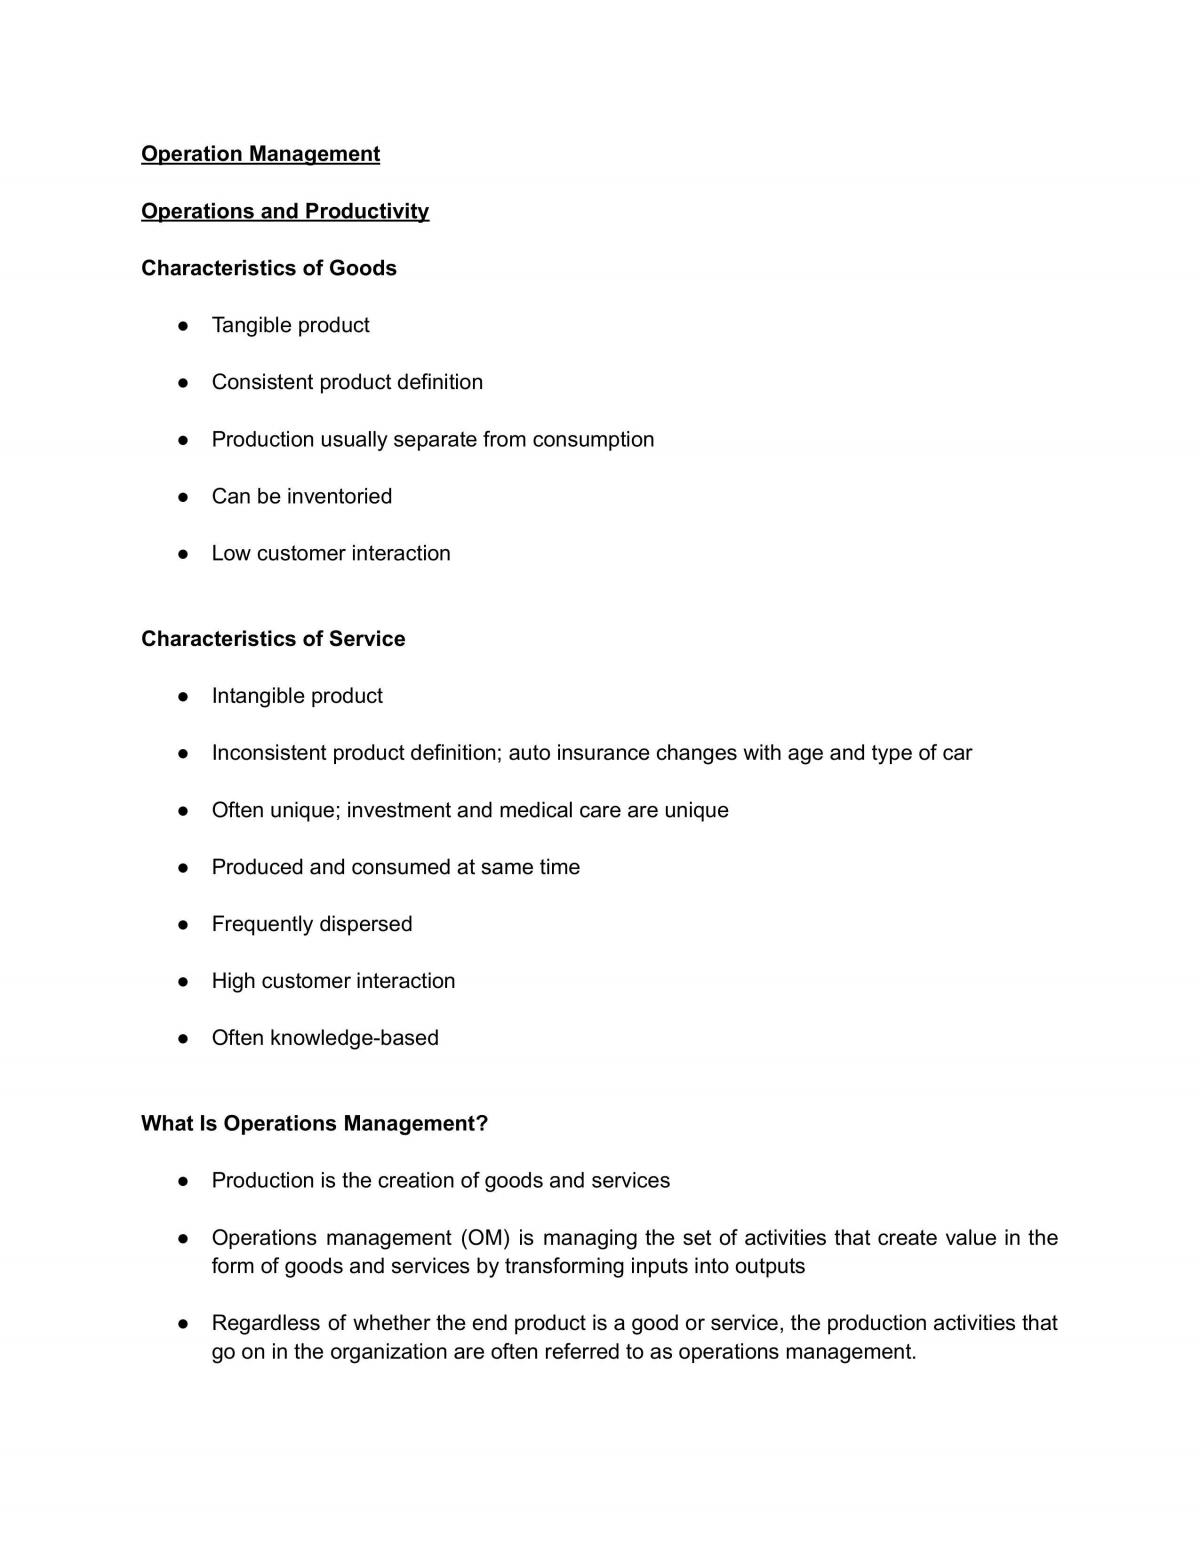 Operation Management Notes - Page 1